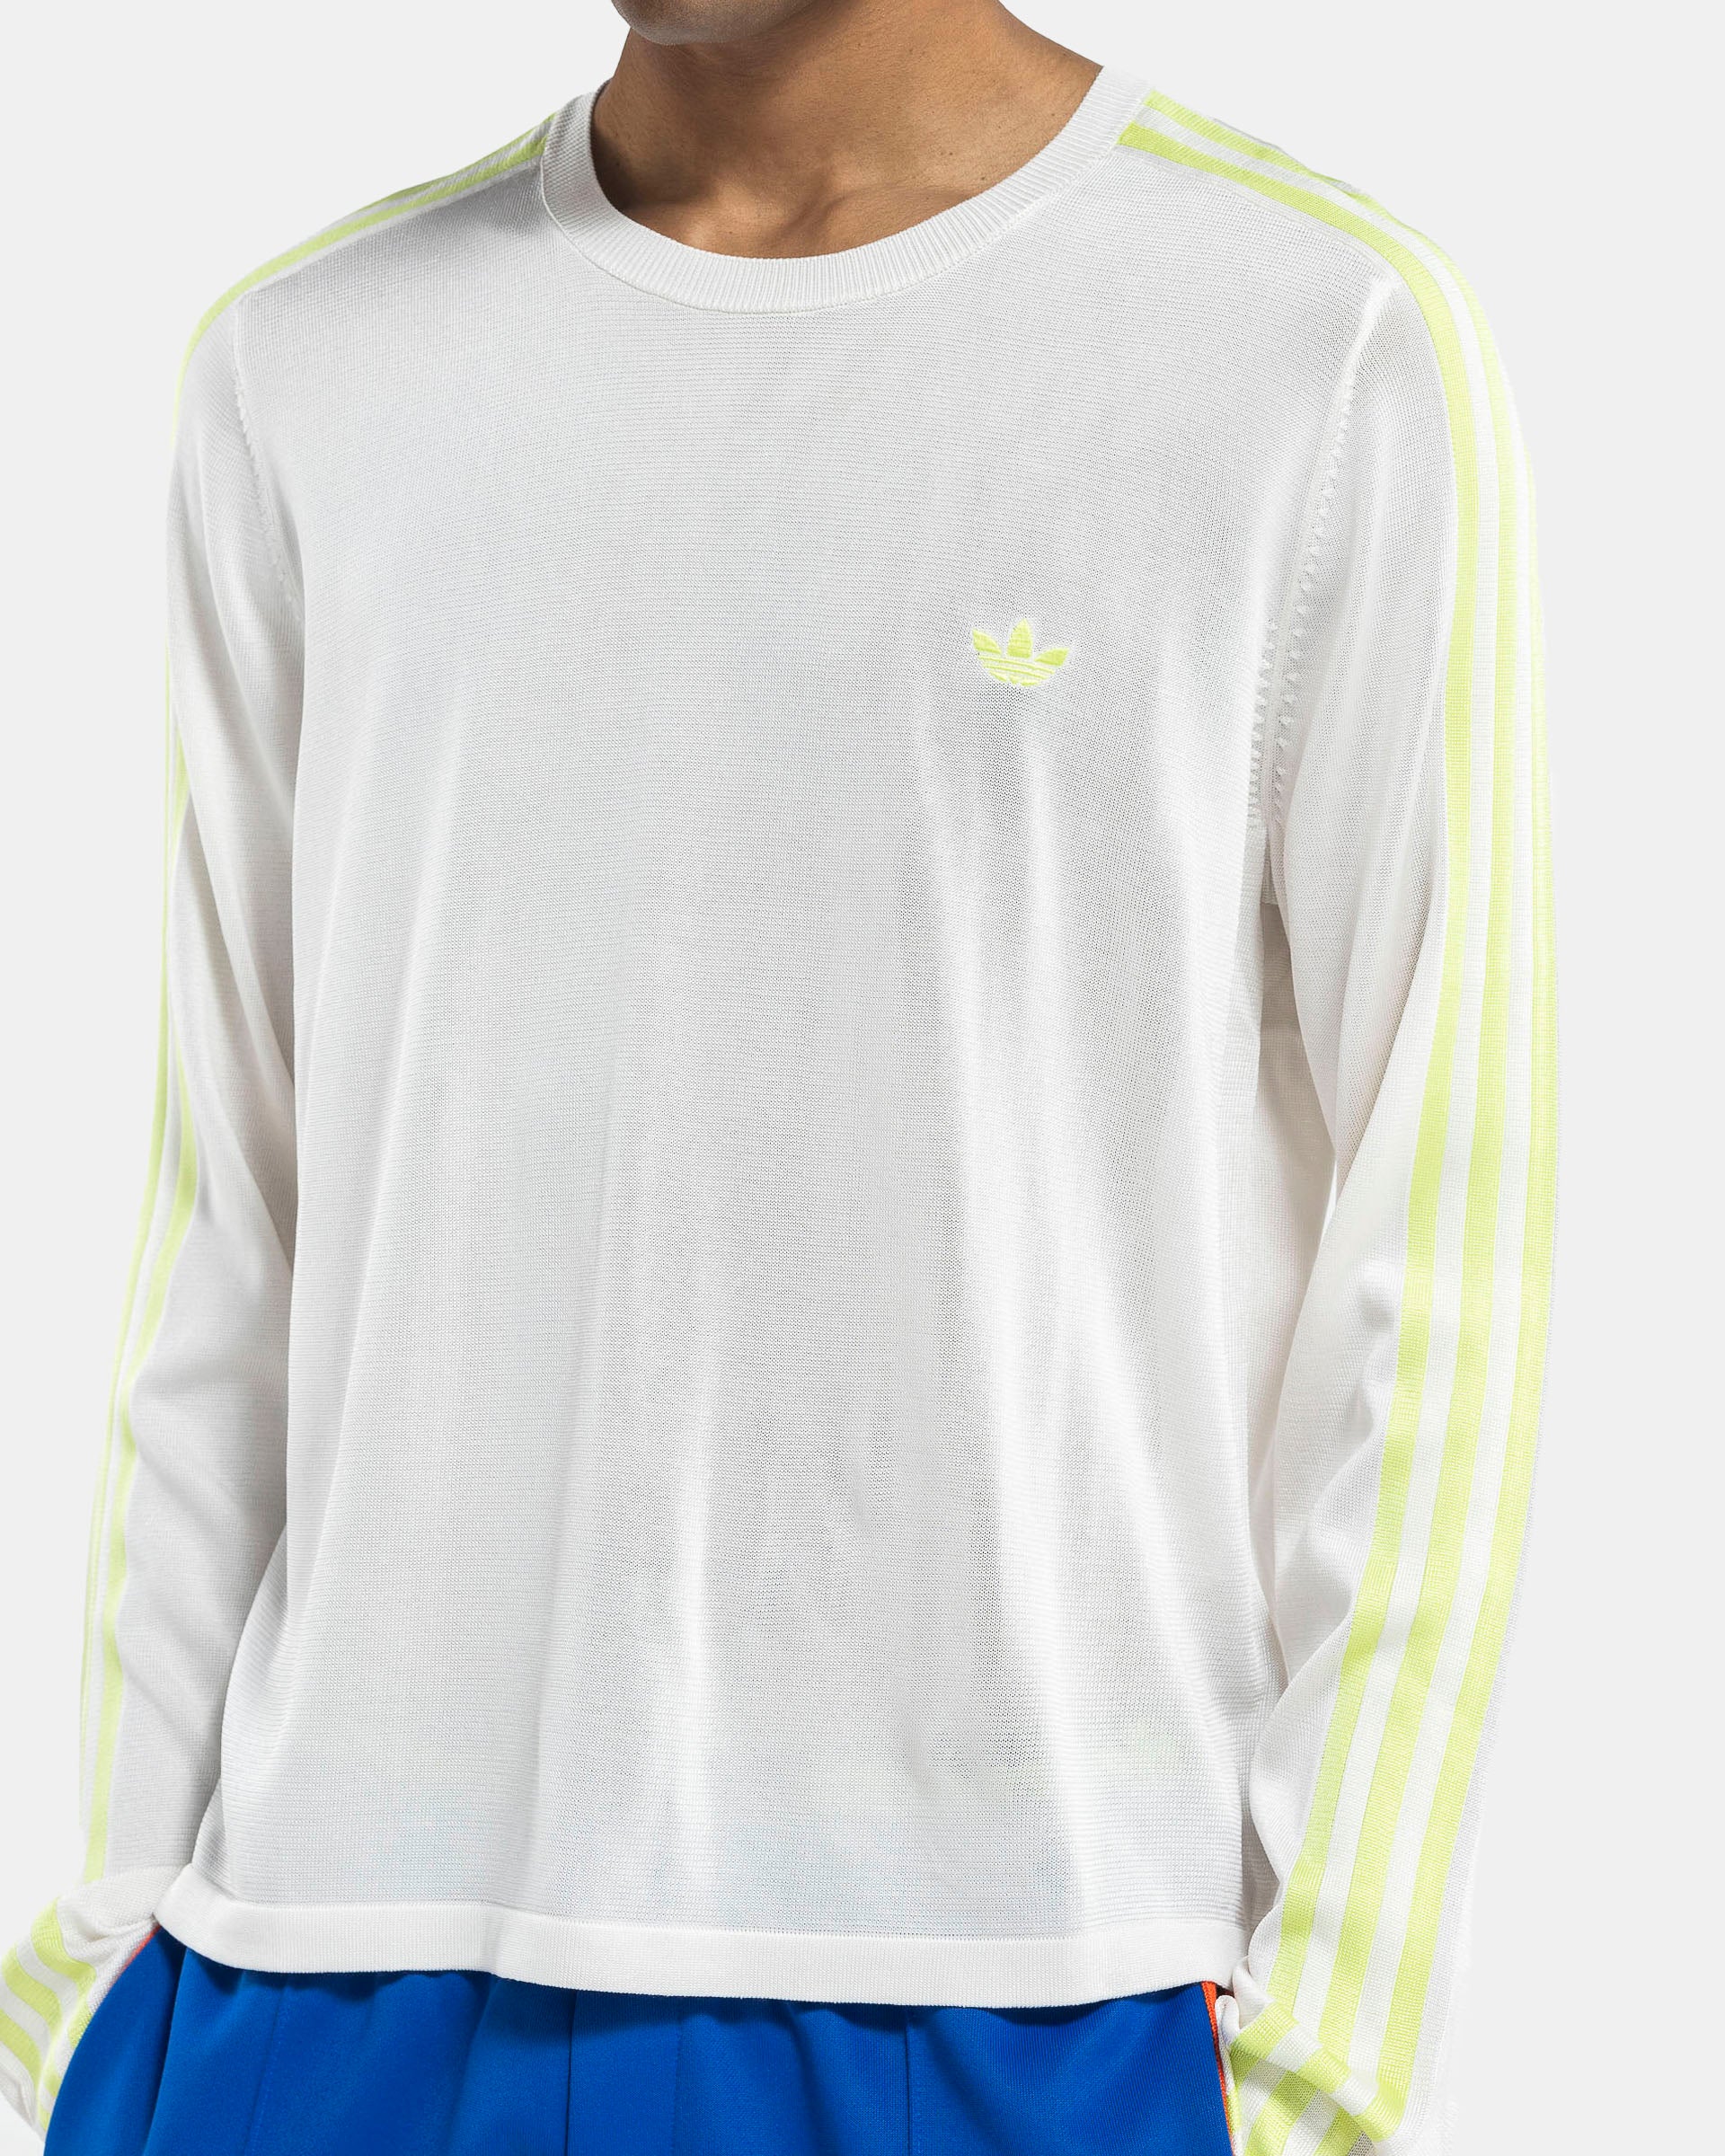 Model wearing Adidas Wales Bonner Knit LST-shirt in Chalk White on the white background